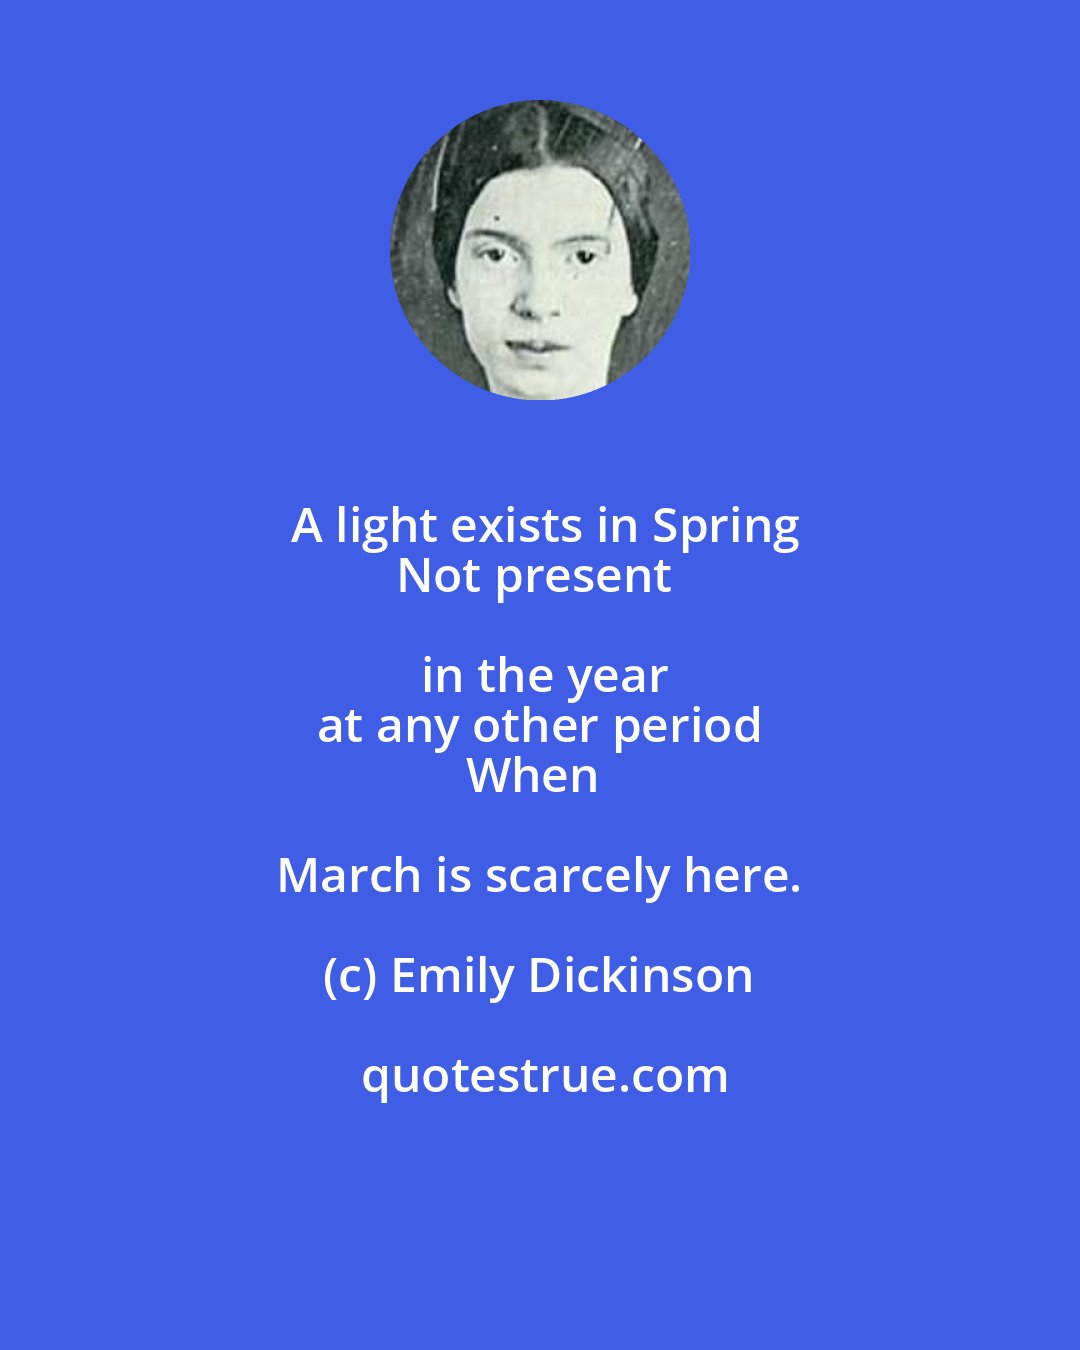 Emily Dickinson: A light exists in Spring
Not present in the year
at any other period
When March is scarcely here.